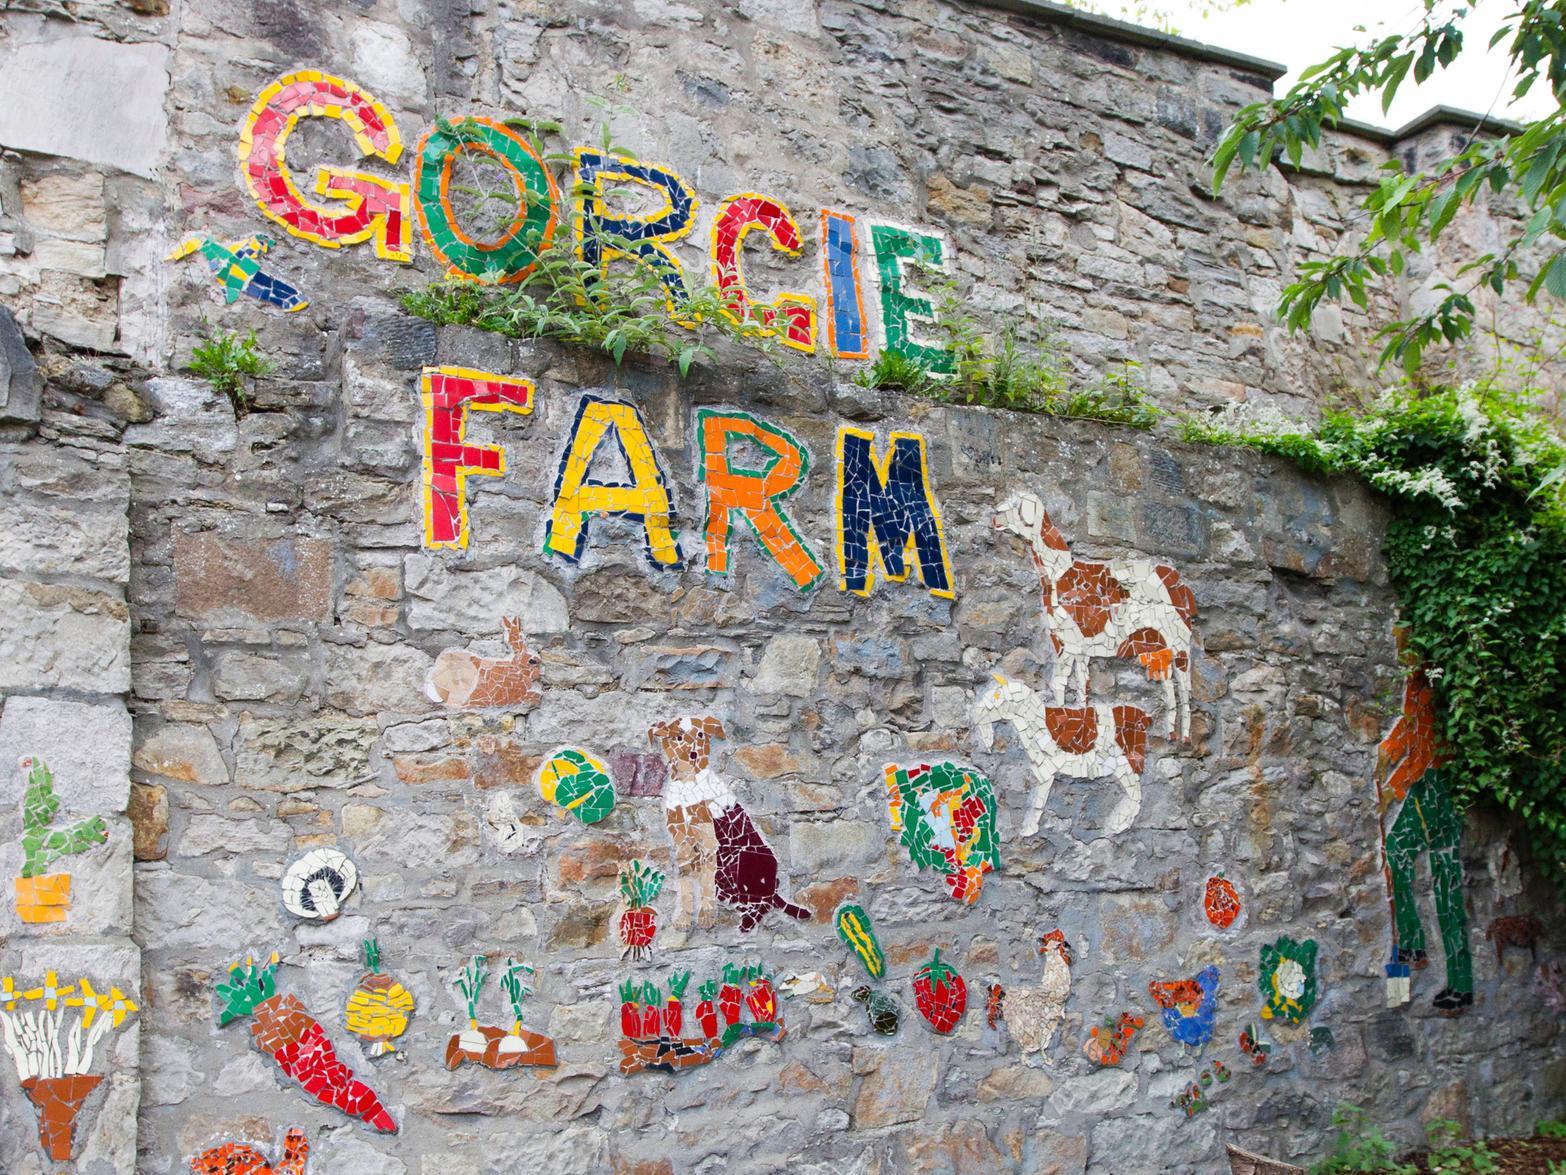 A total of 18 jobs will be lost as a result of the decision to close Gorgie Farm.